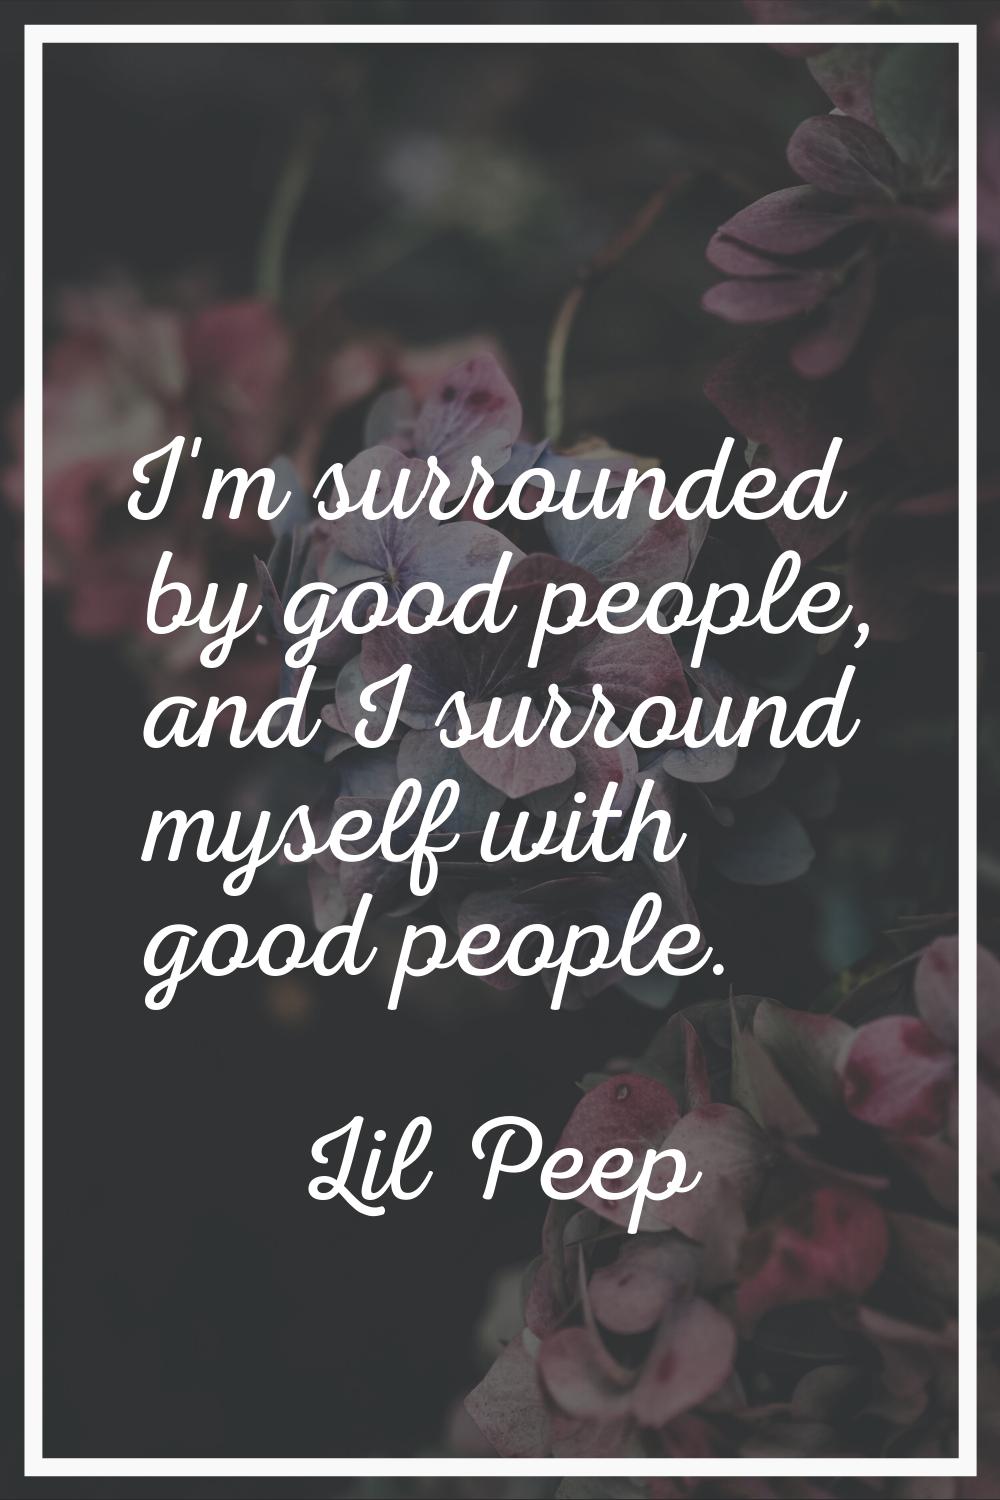 I'm surrounded by good people, and I surround myself with good people.